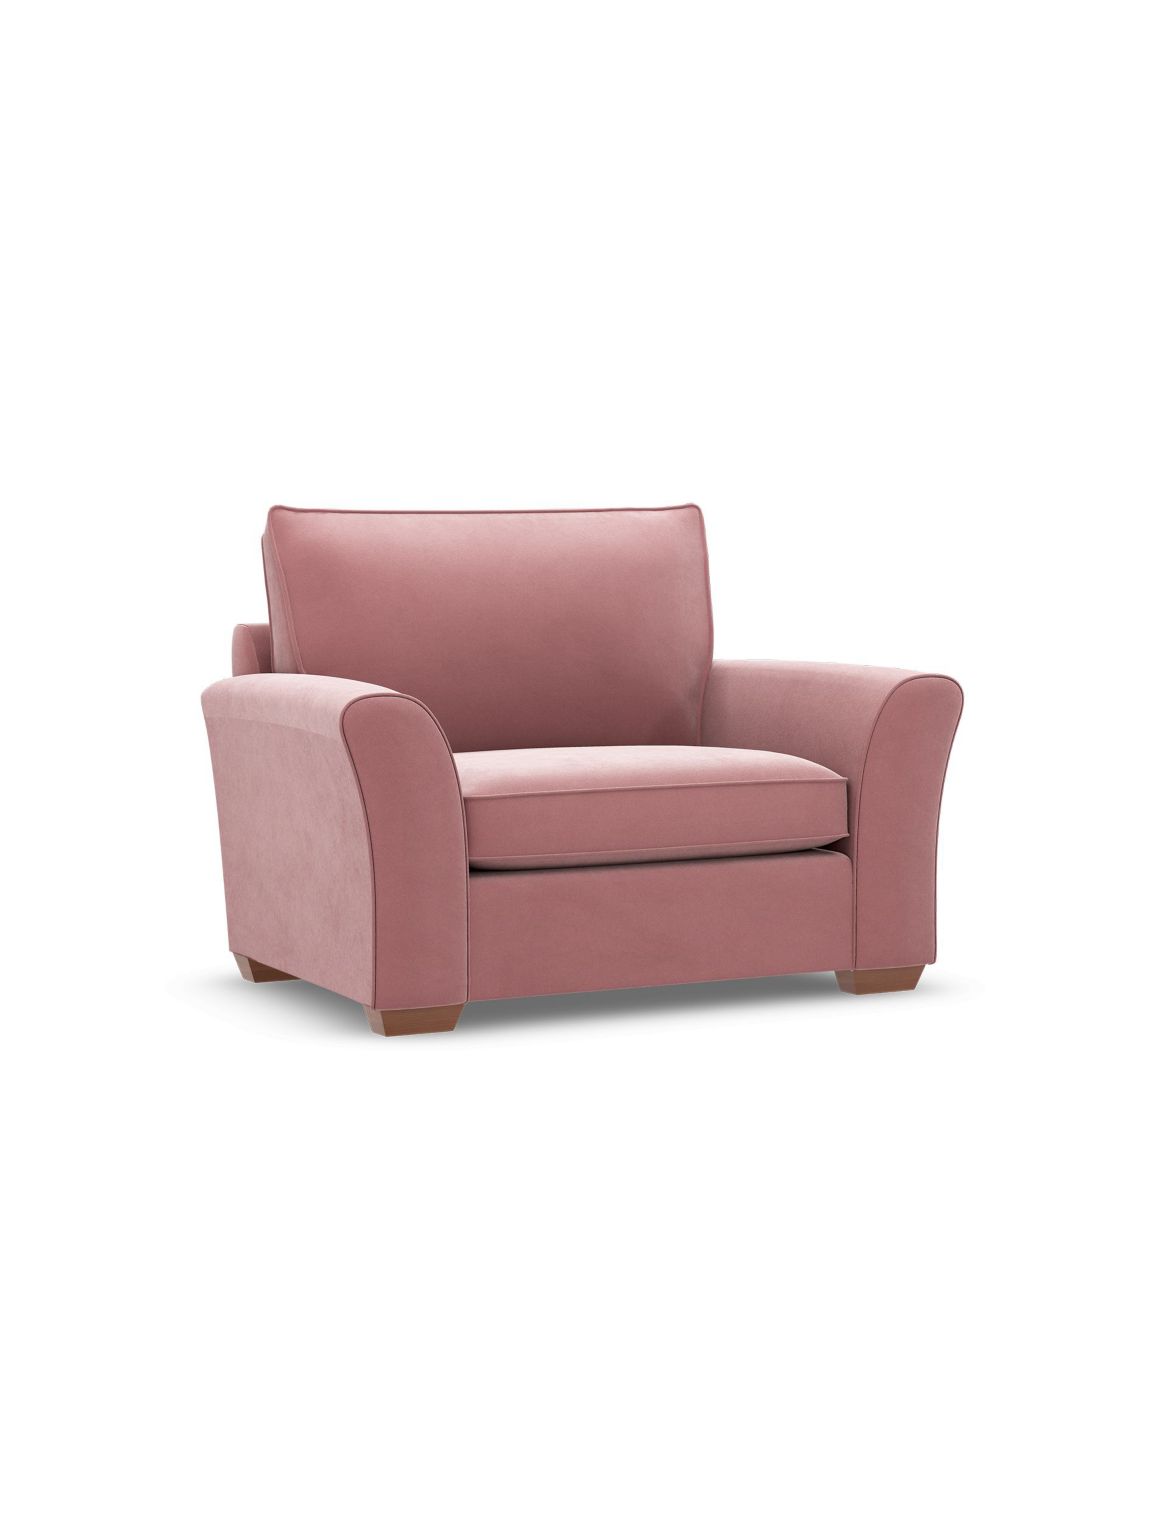 Lincoln Loveseat pink